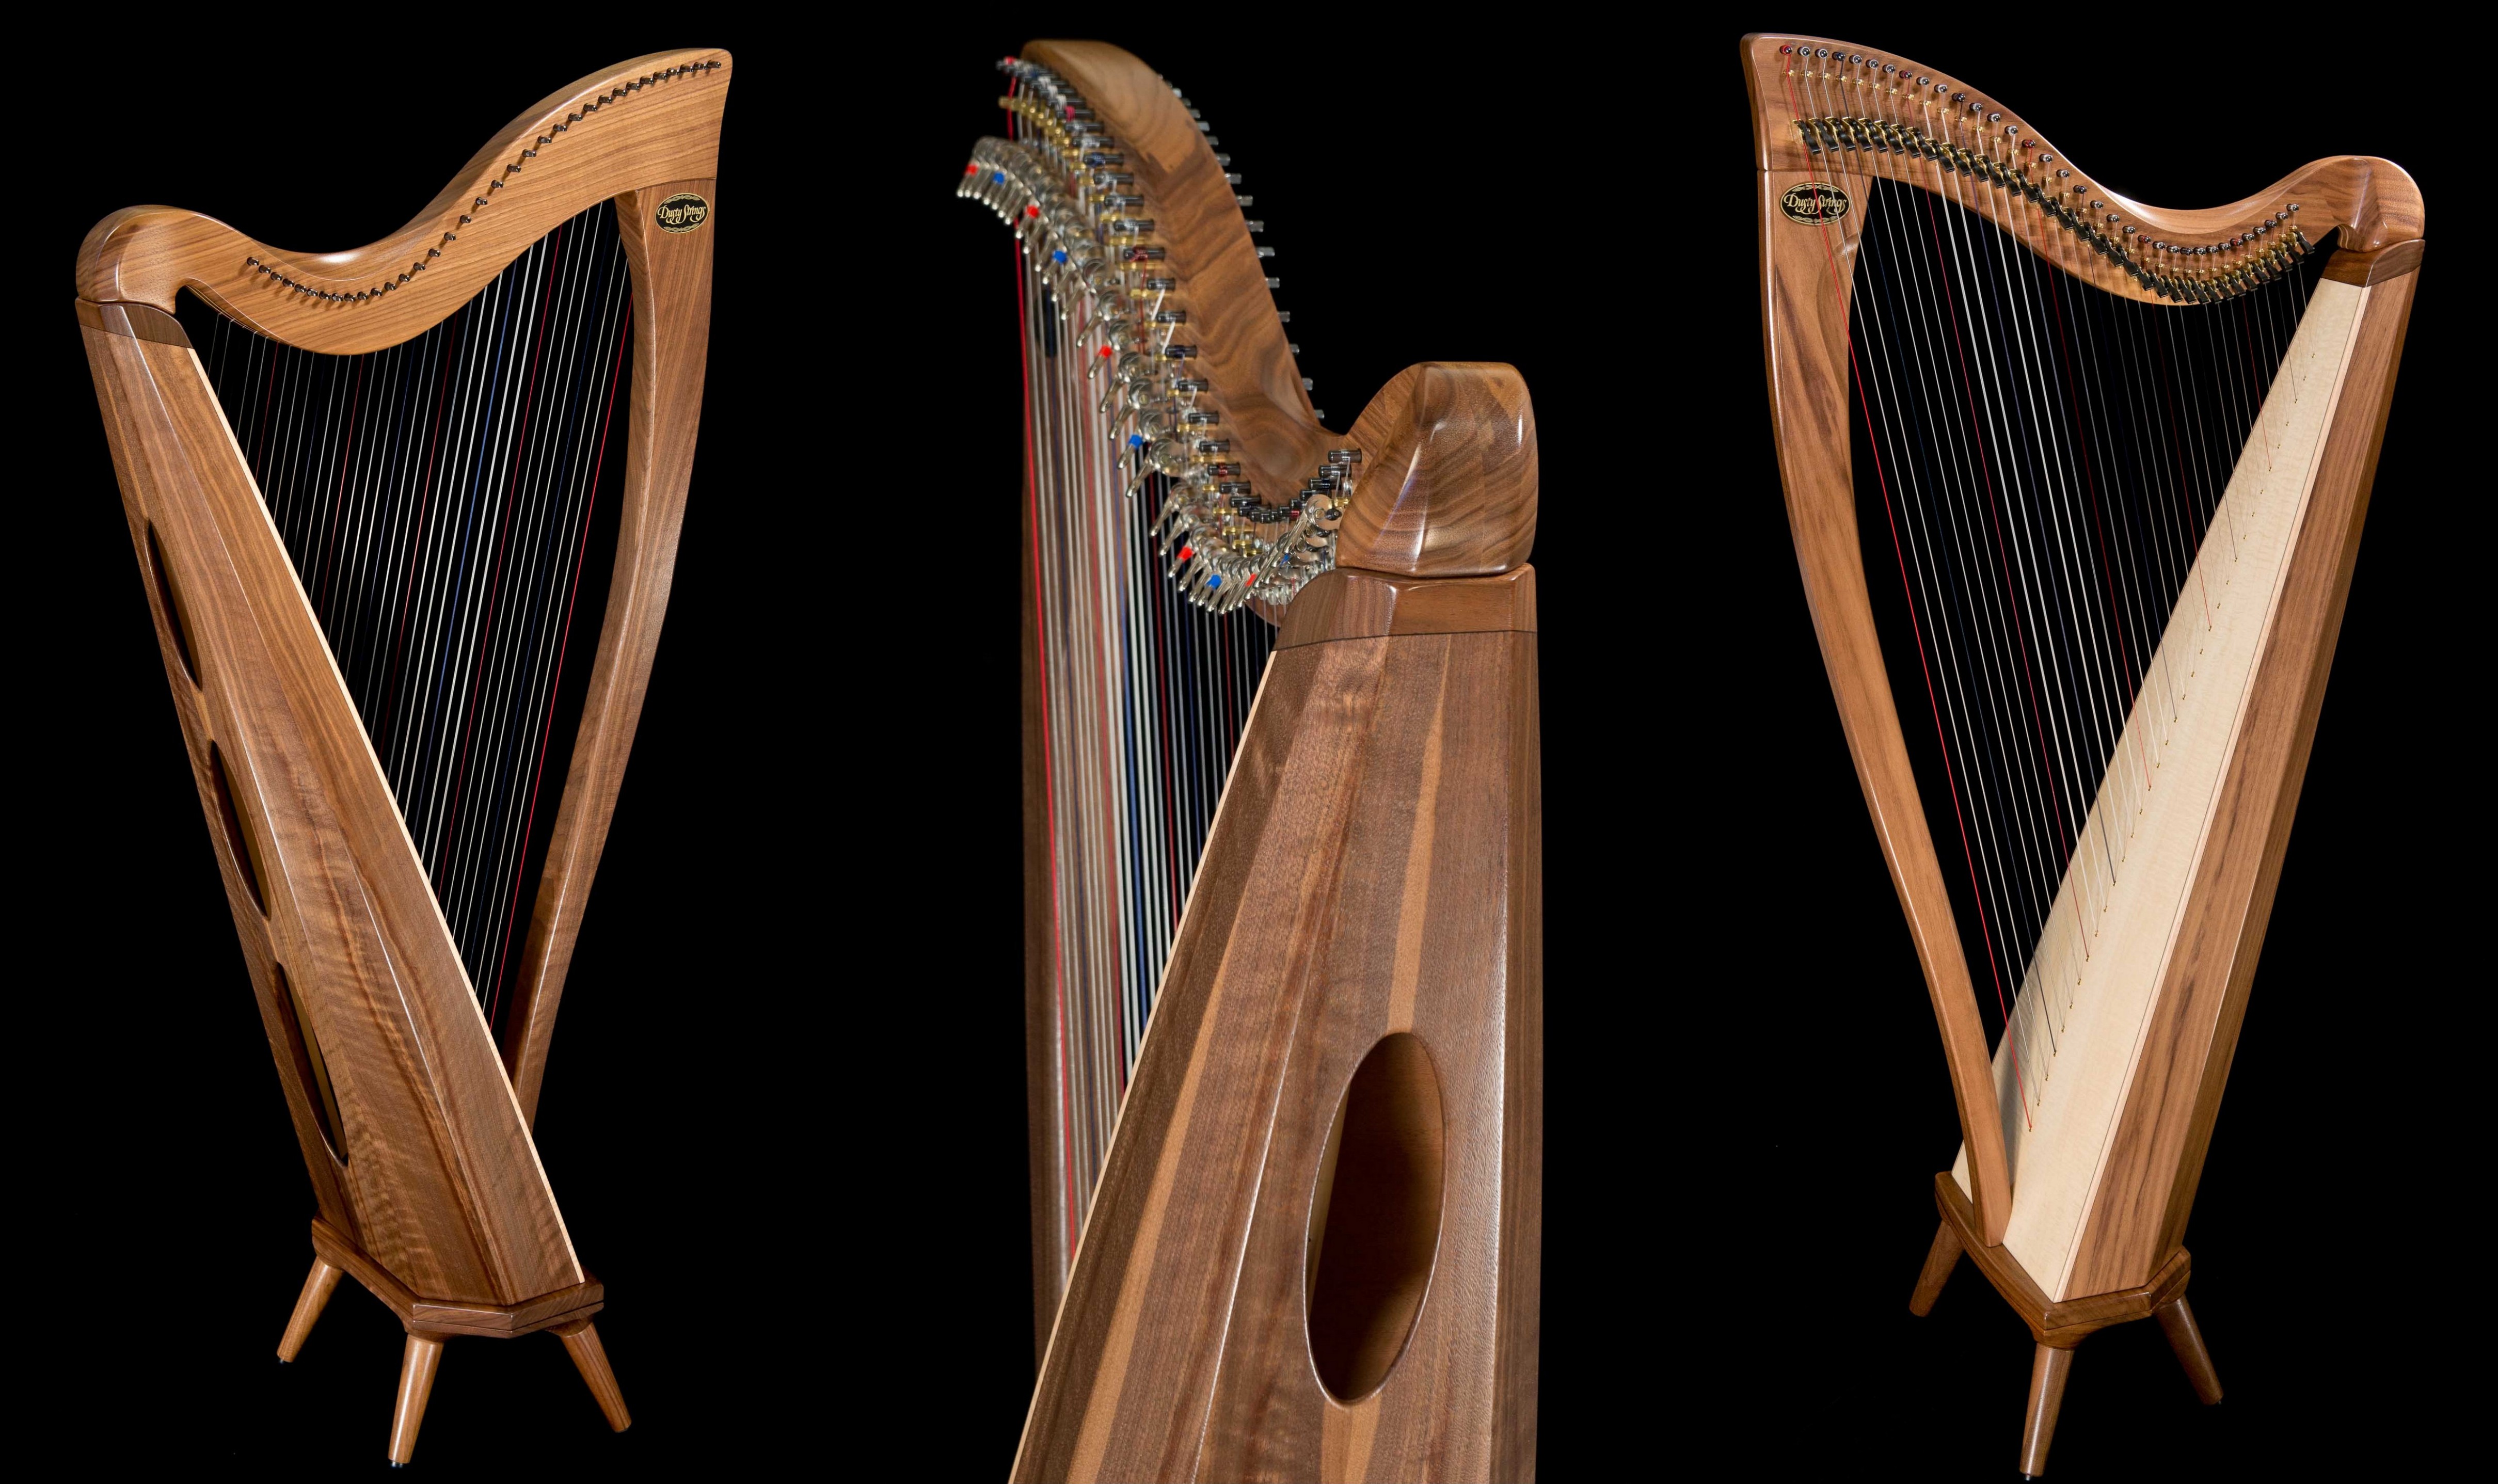 Beginners' Harp & Lyre Christmas Collection: Simple and Beautiful Harmonies  for 15 strings tuned to the key of C (Good Old Tunes Harp Music)